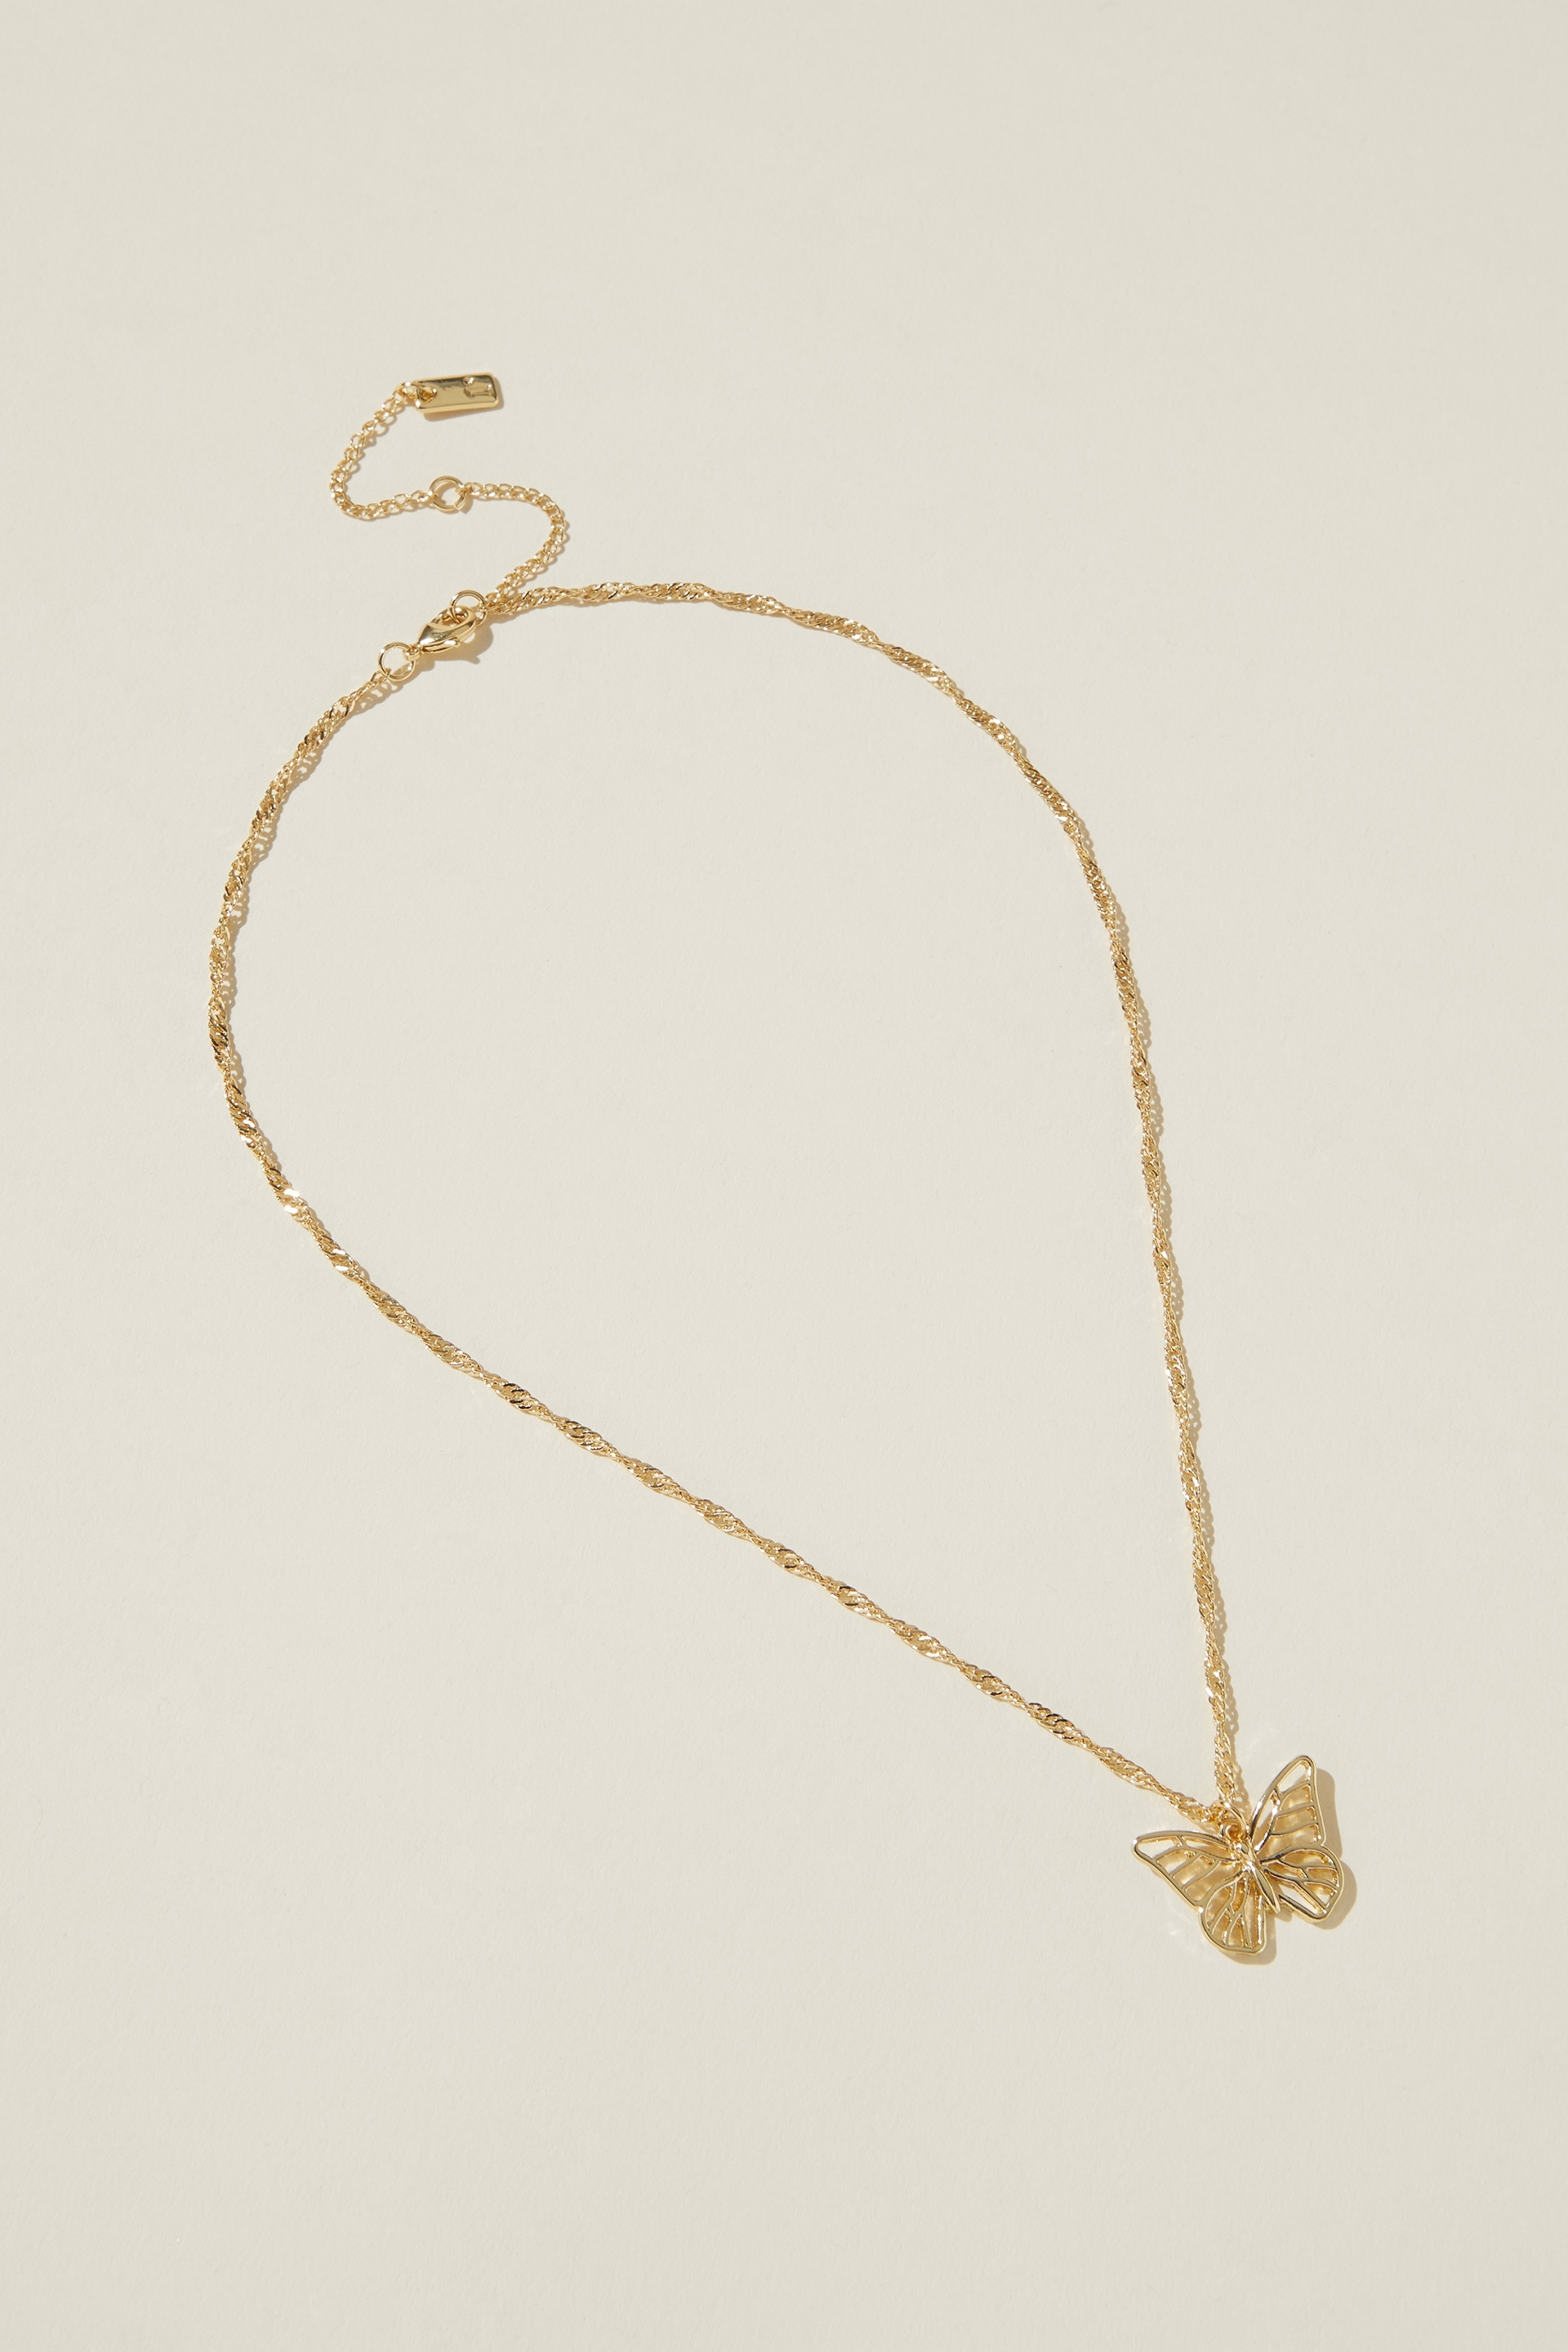 Rubi - Pendant Necklace - Gold plated butterfly filigree